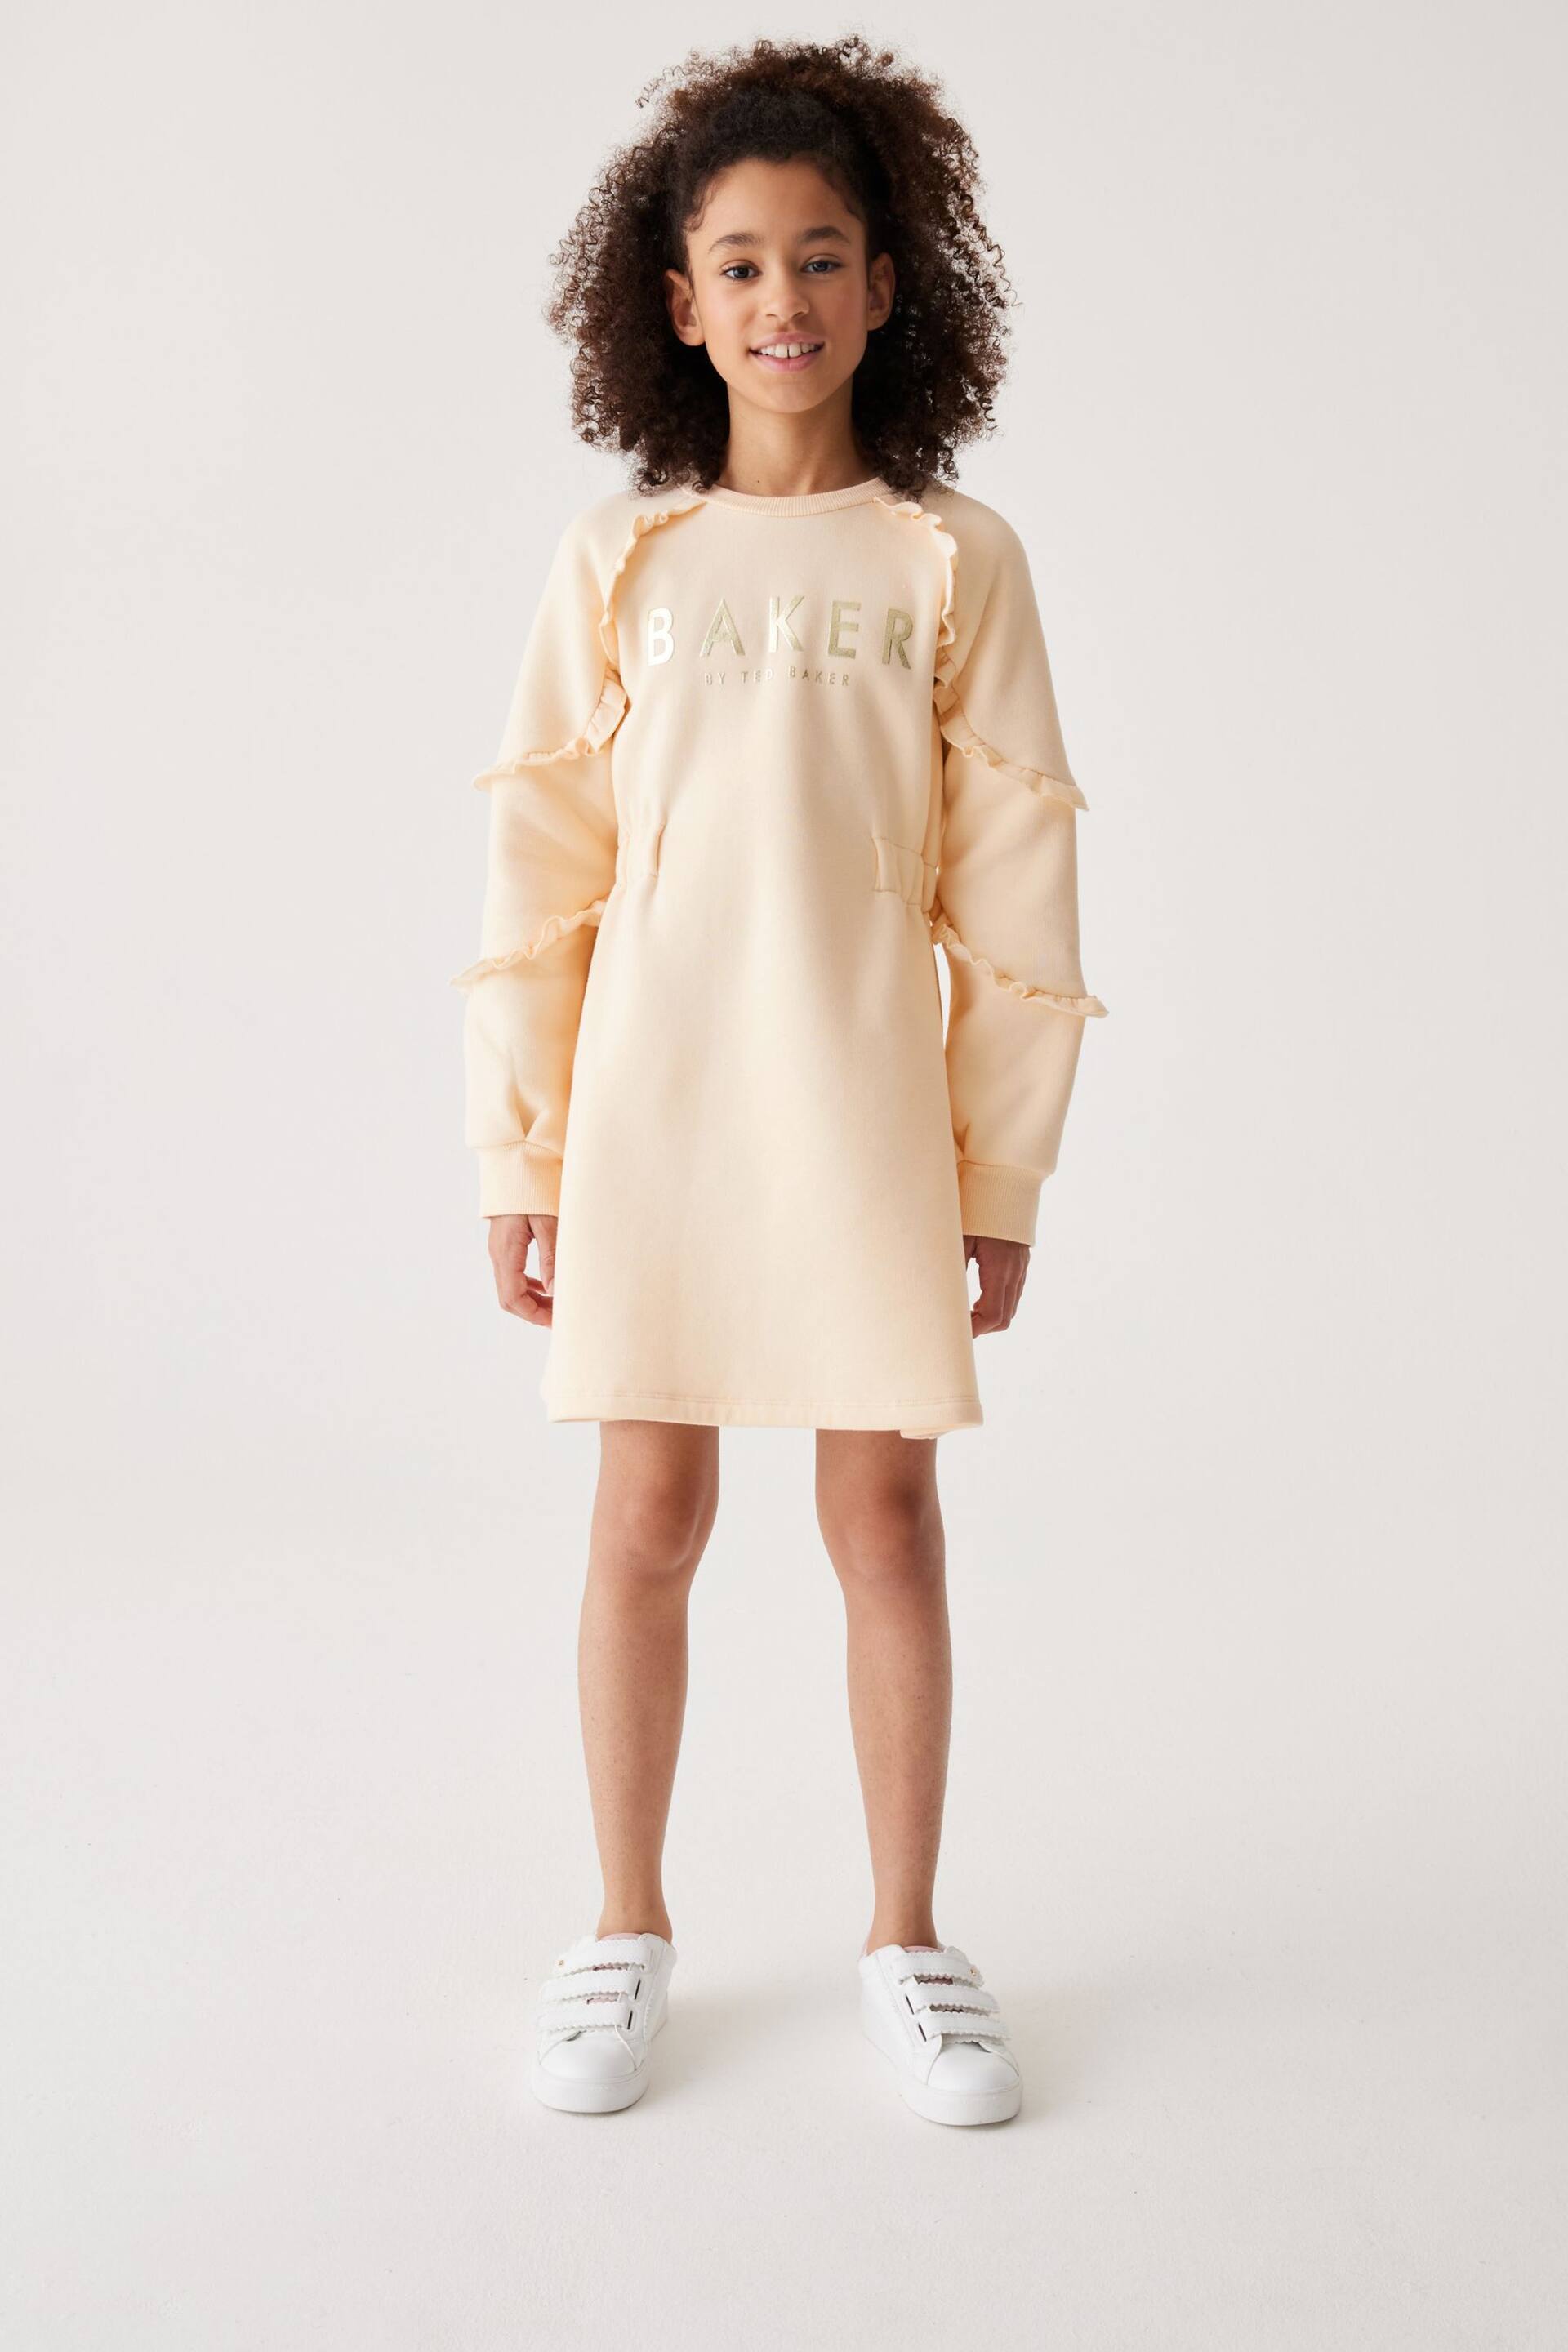 Baker by Ted Baker Frilled Sweat Dress - Image 2 of 9